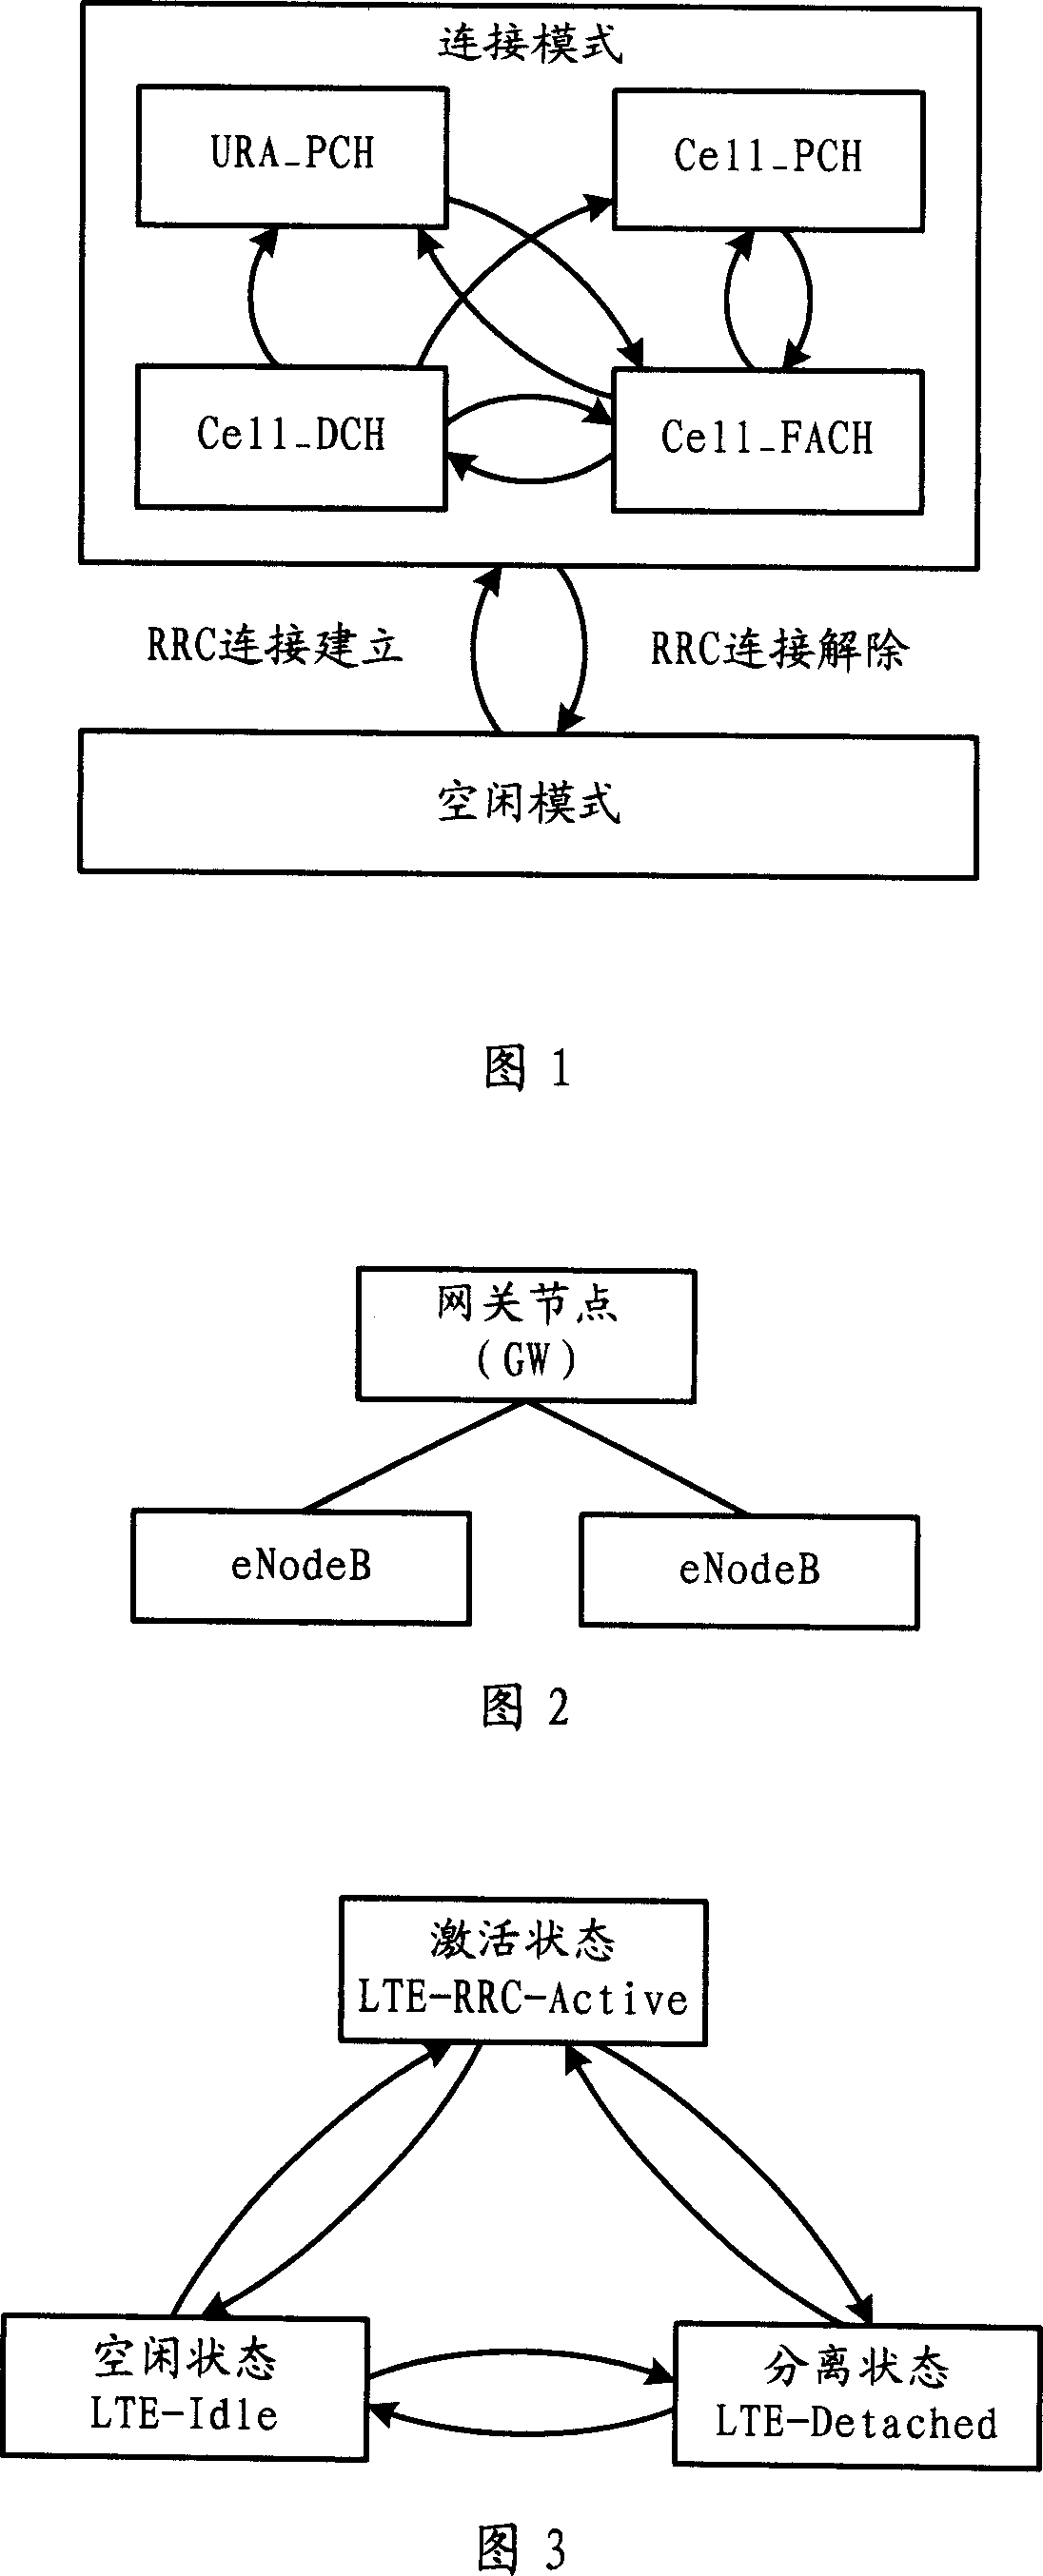 Conversion method of the long-evolving network and its user device states